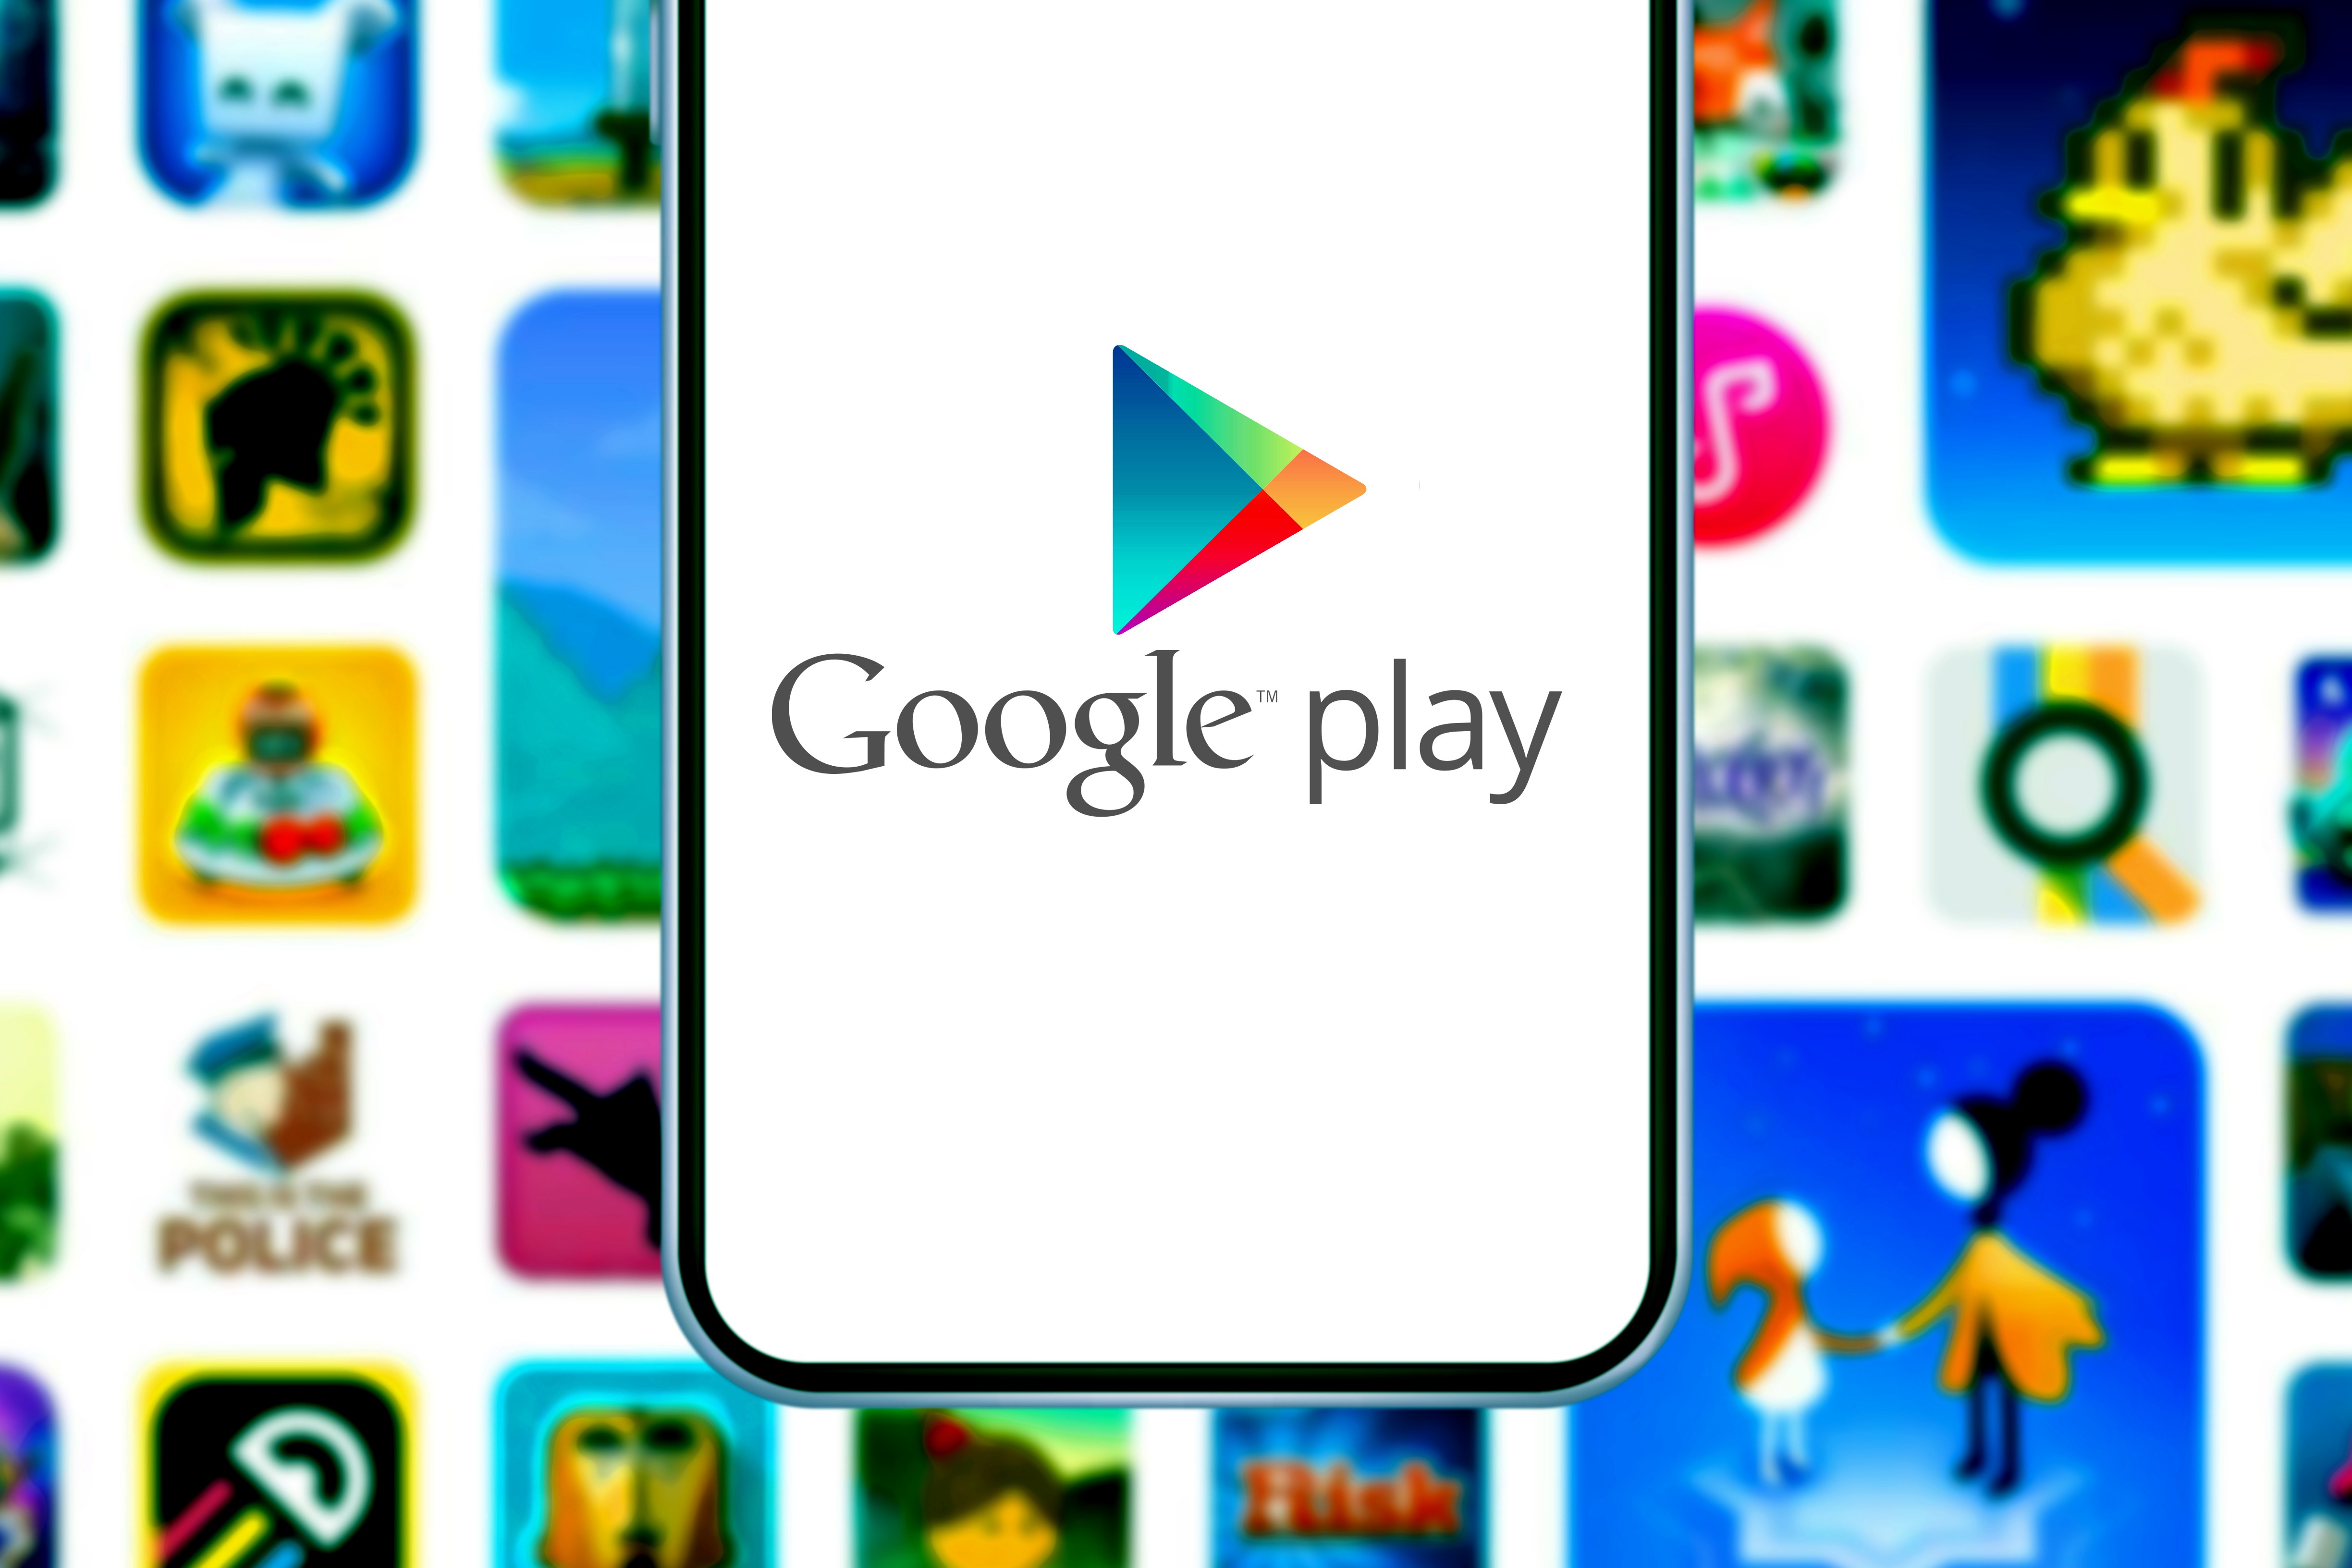 Fix app by Fix.com - Apps on Google Play